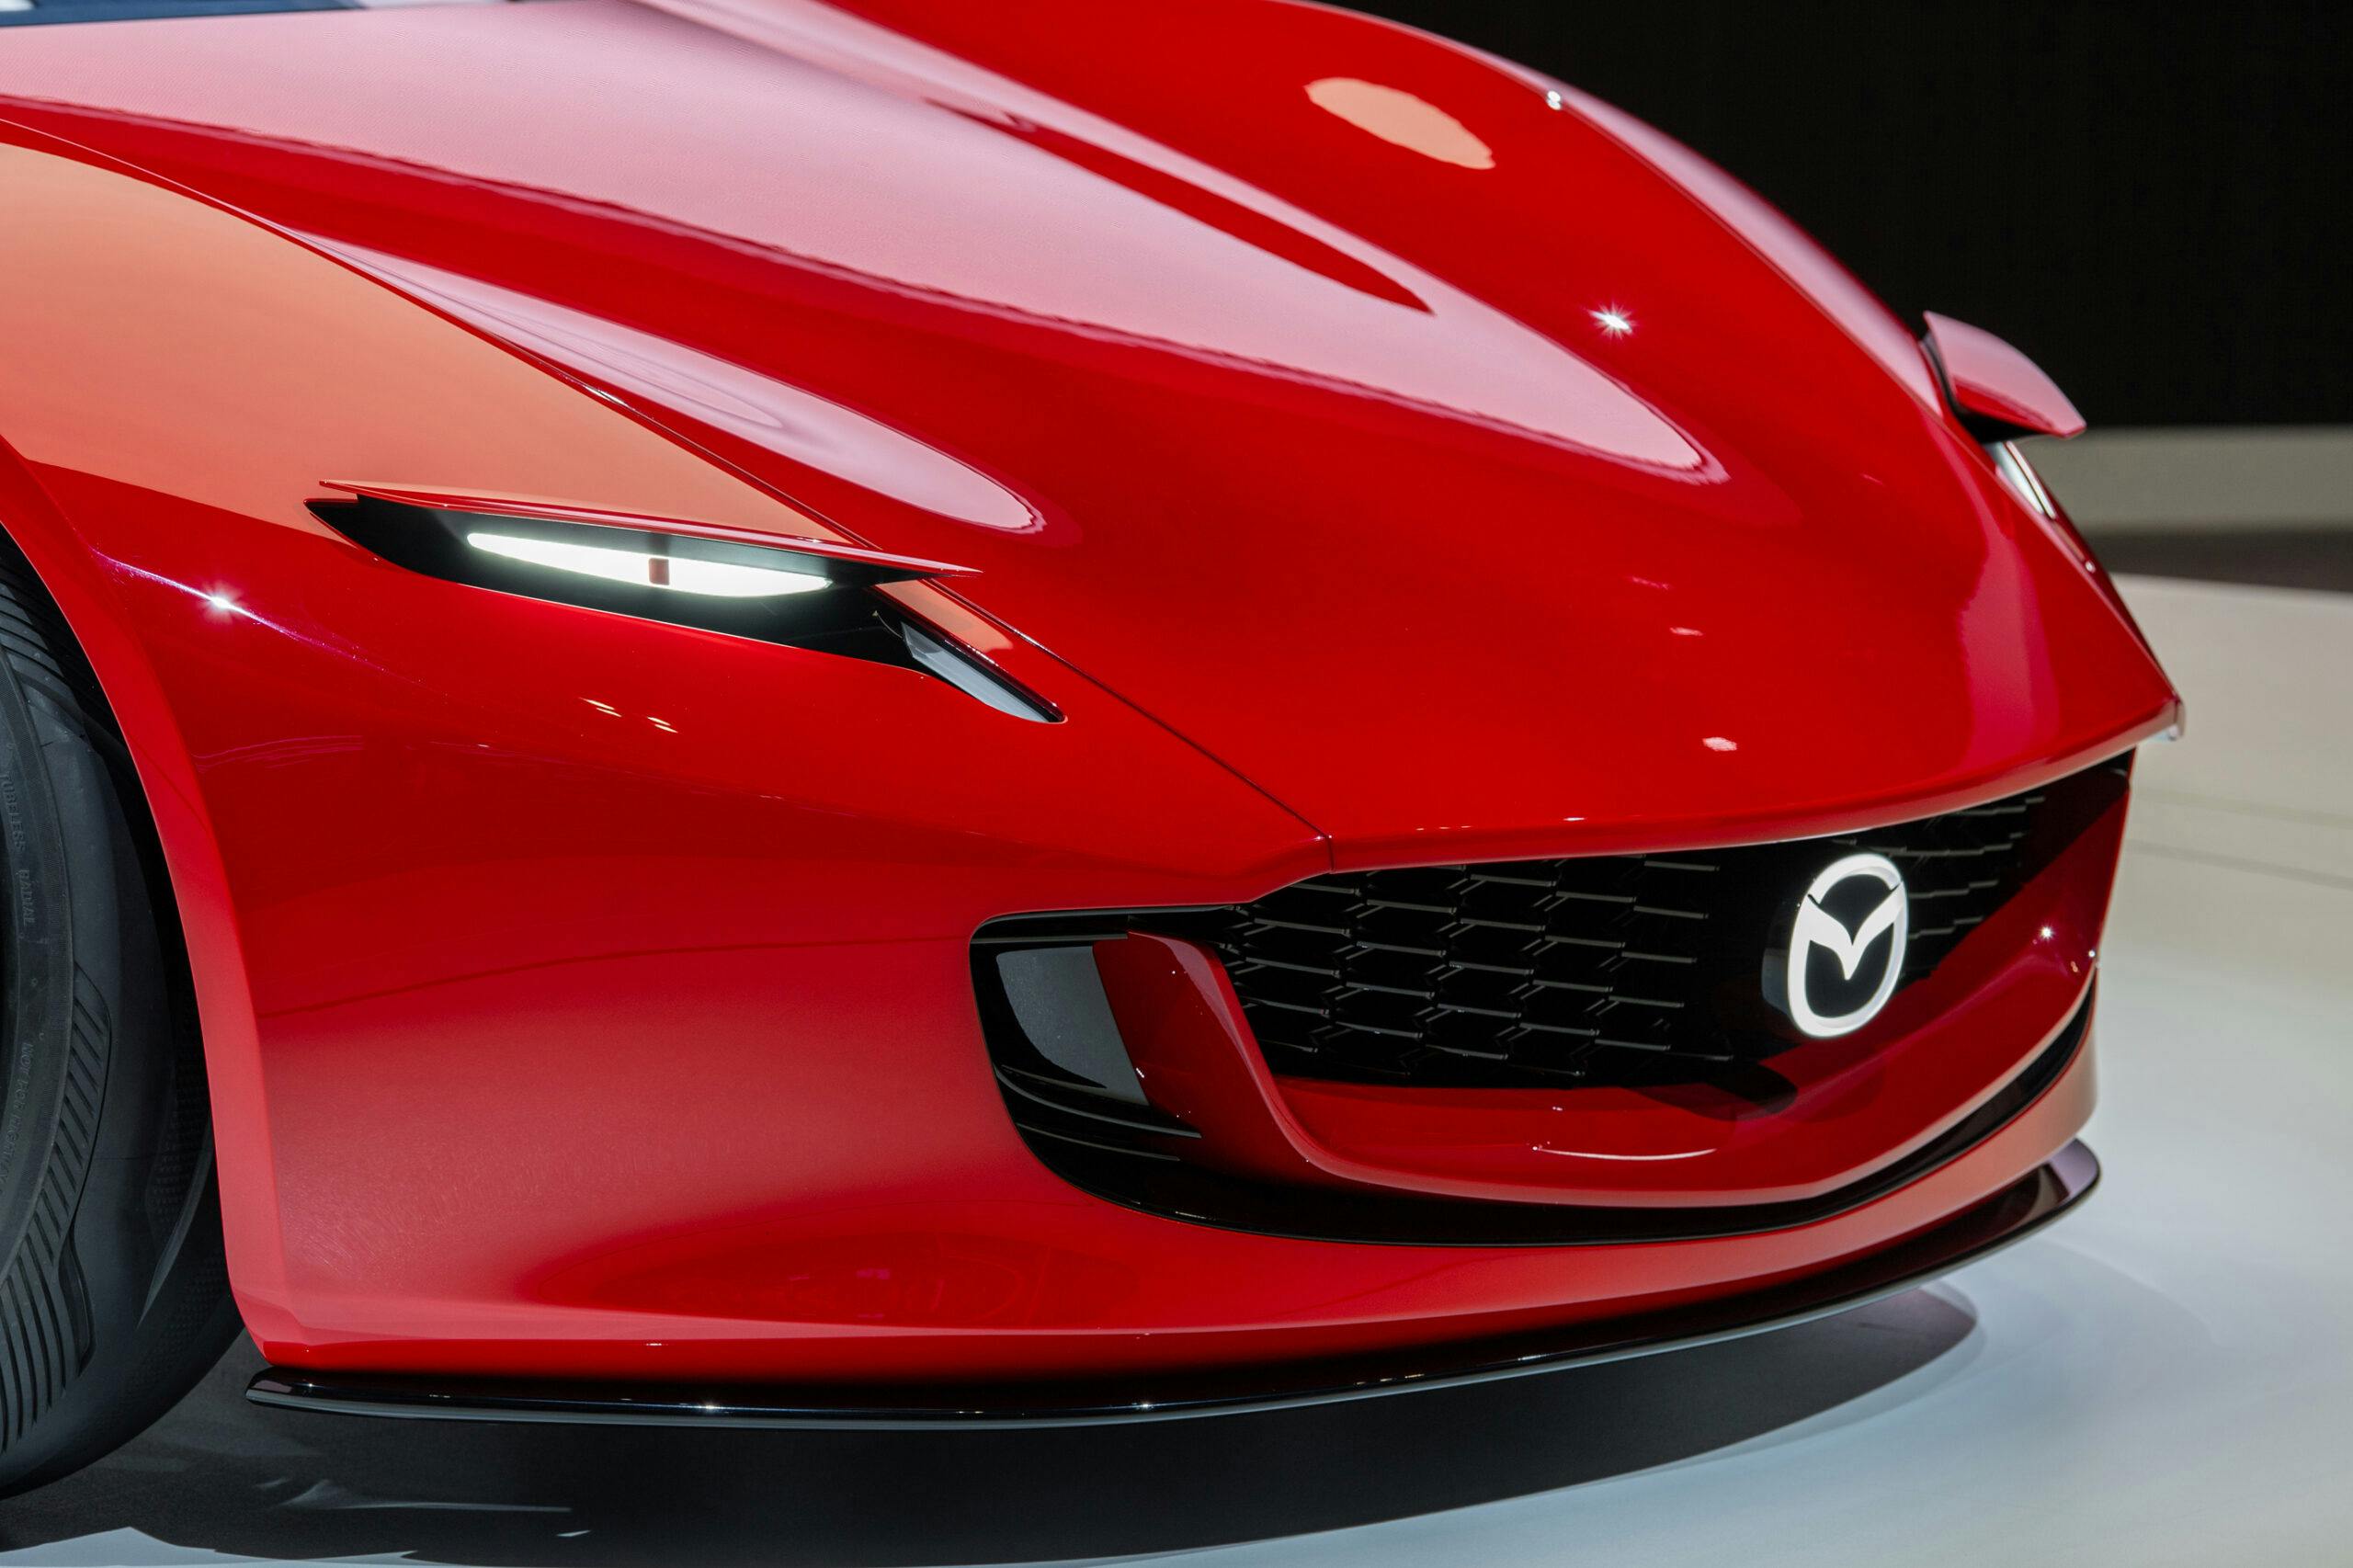 Mazda Iconic SP Concept Car front nose